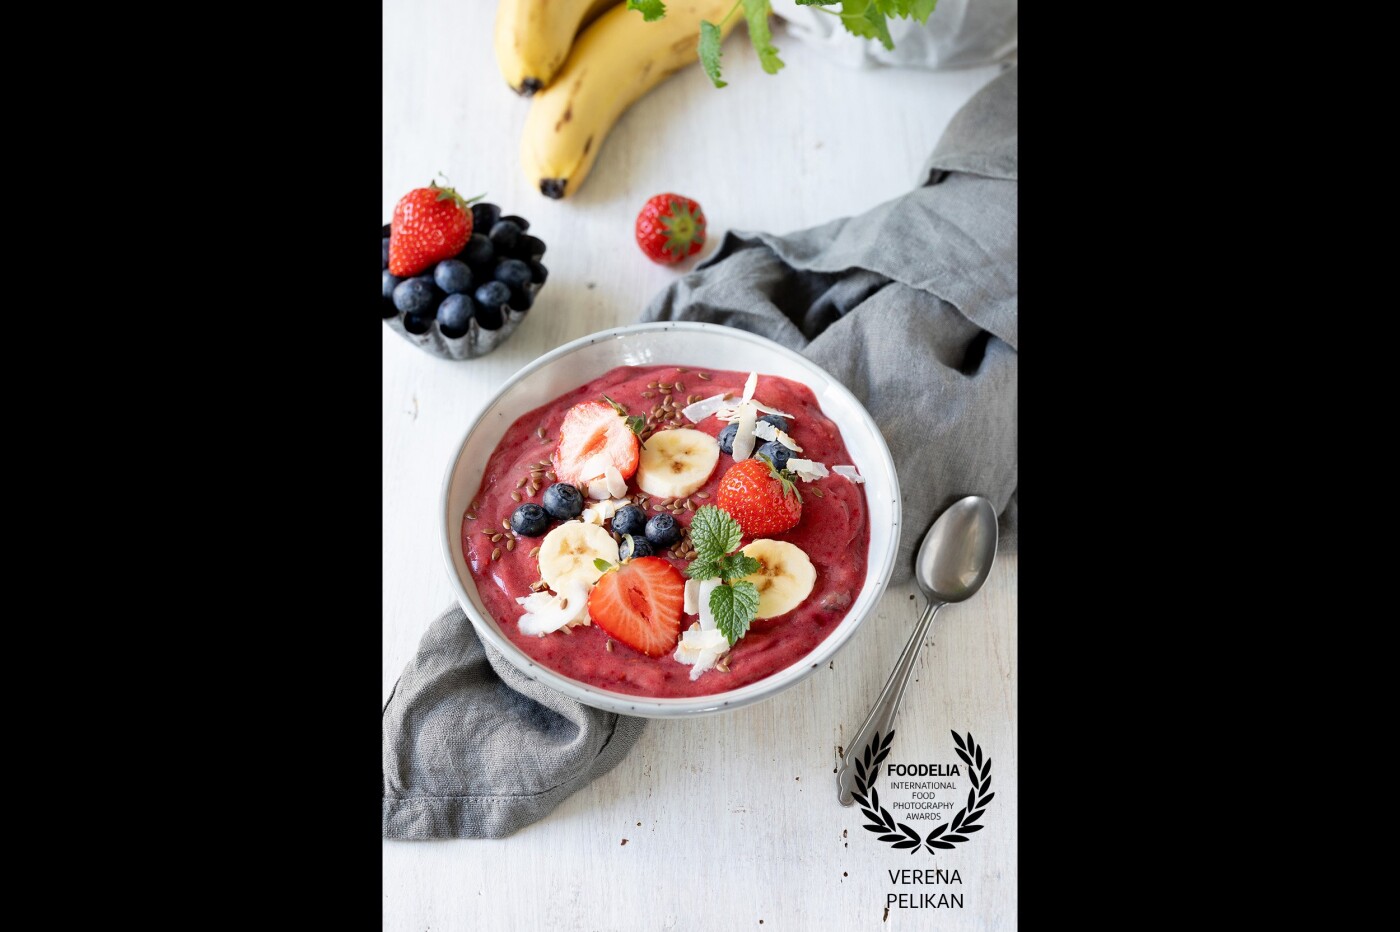 Homemade strawberry smoothie bowl . You can find the recipe and more photos on my website: https://www.sweetsandlifestyle.com/erdbeer-smoothie-bowl/